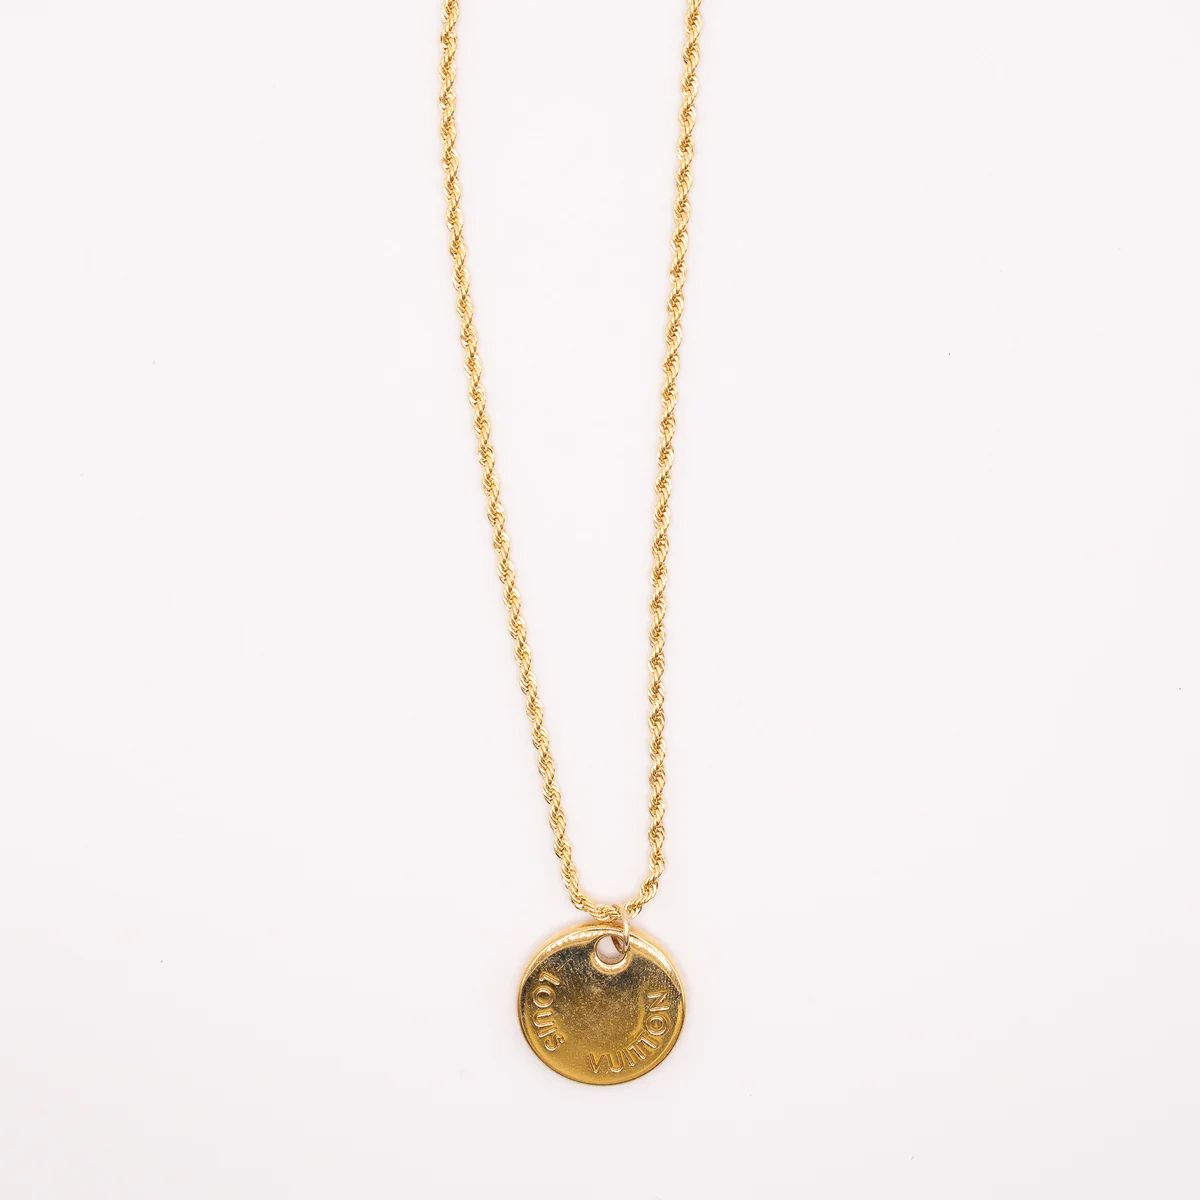 Limited Edition 18k Yellow Gold Rope Chain Necklace with Upcycled LV Circle Pendant | Spark*l